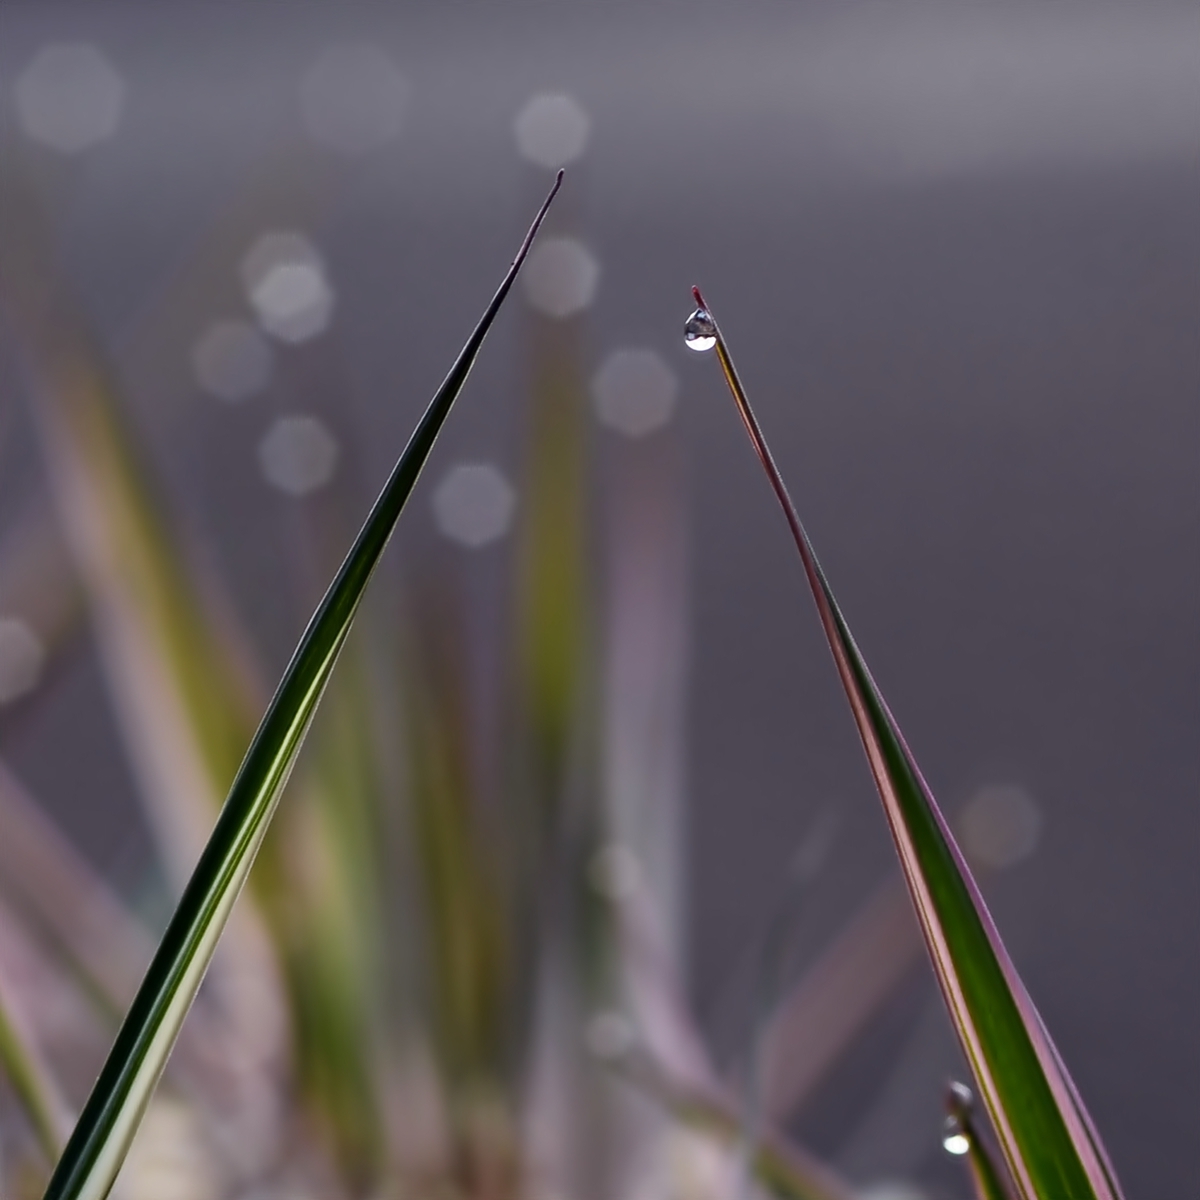 grass reed waterdrops morning dew